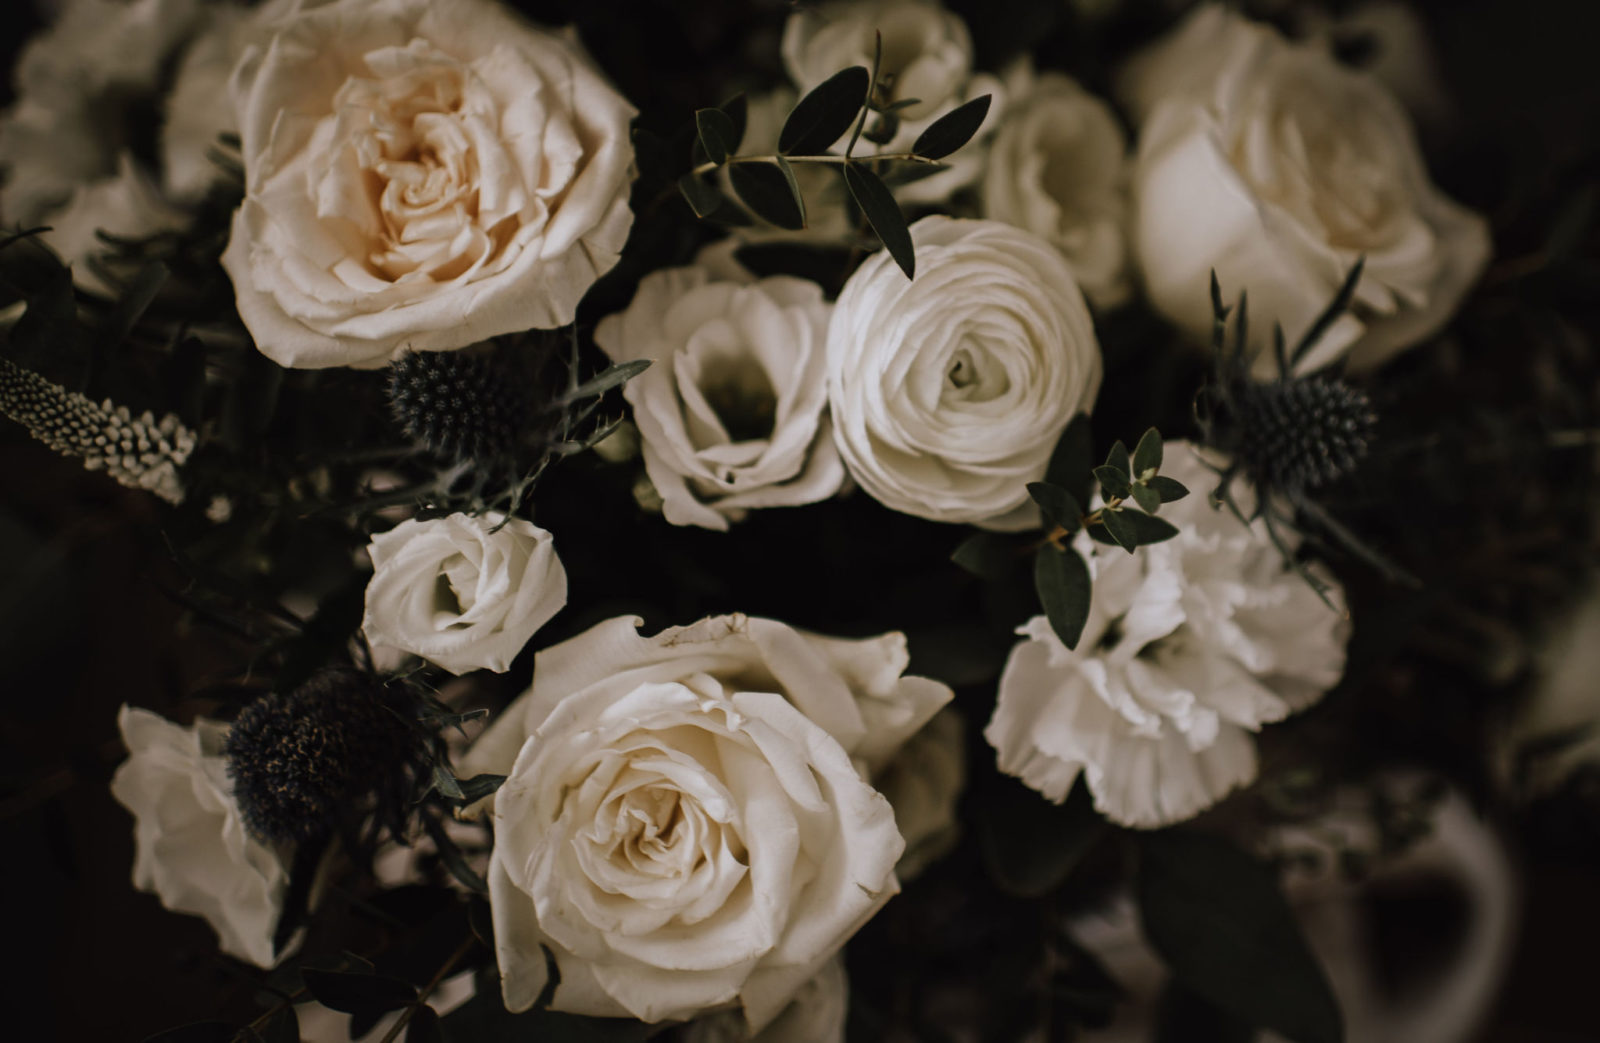 Monochromatic floral arrangement with white roses and white ranunculus